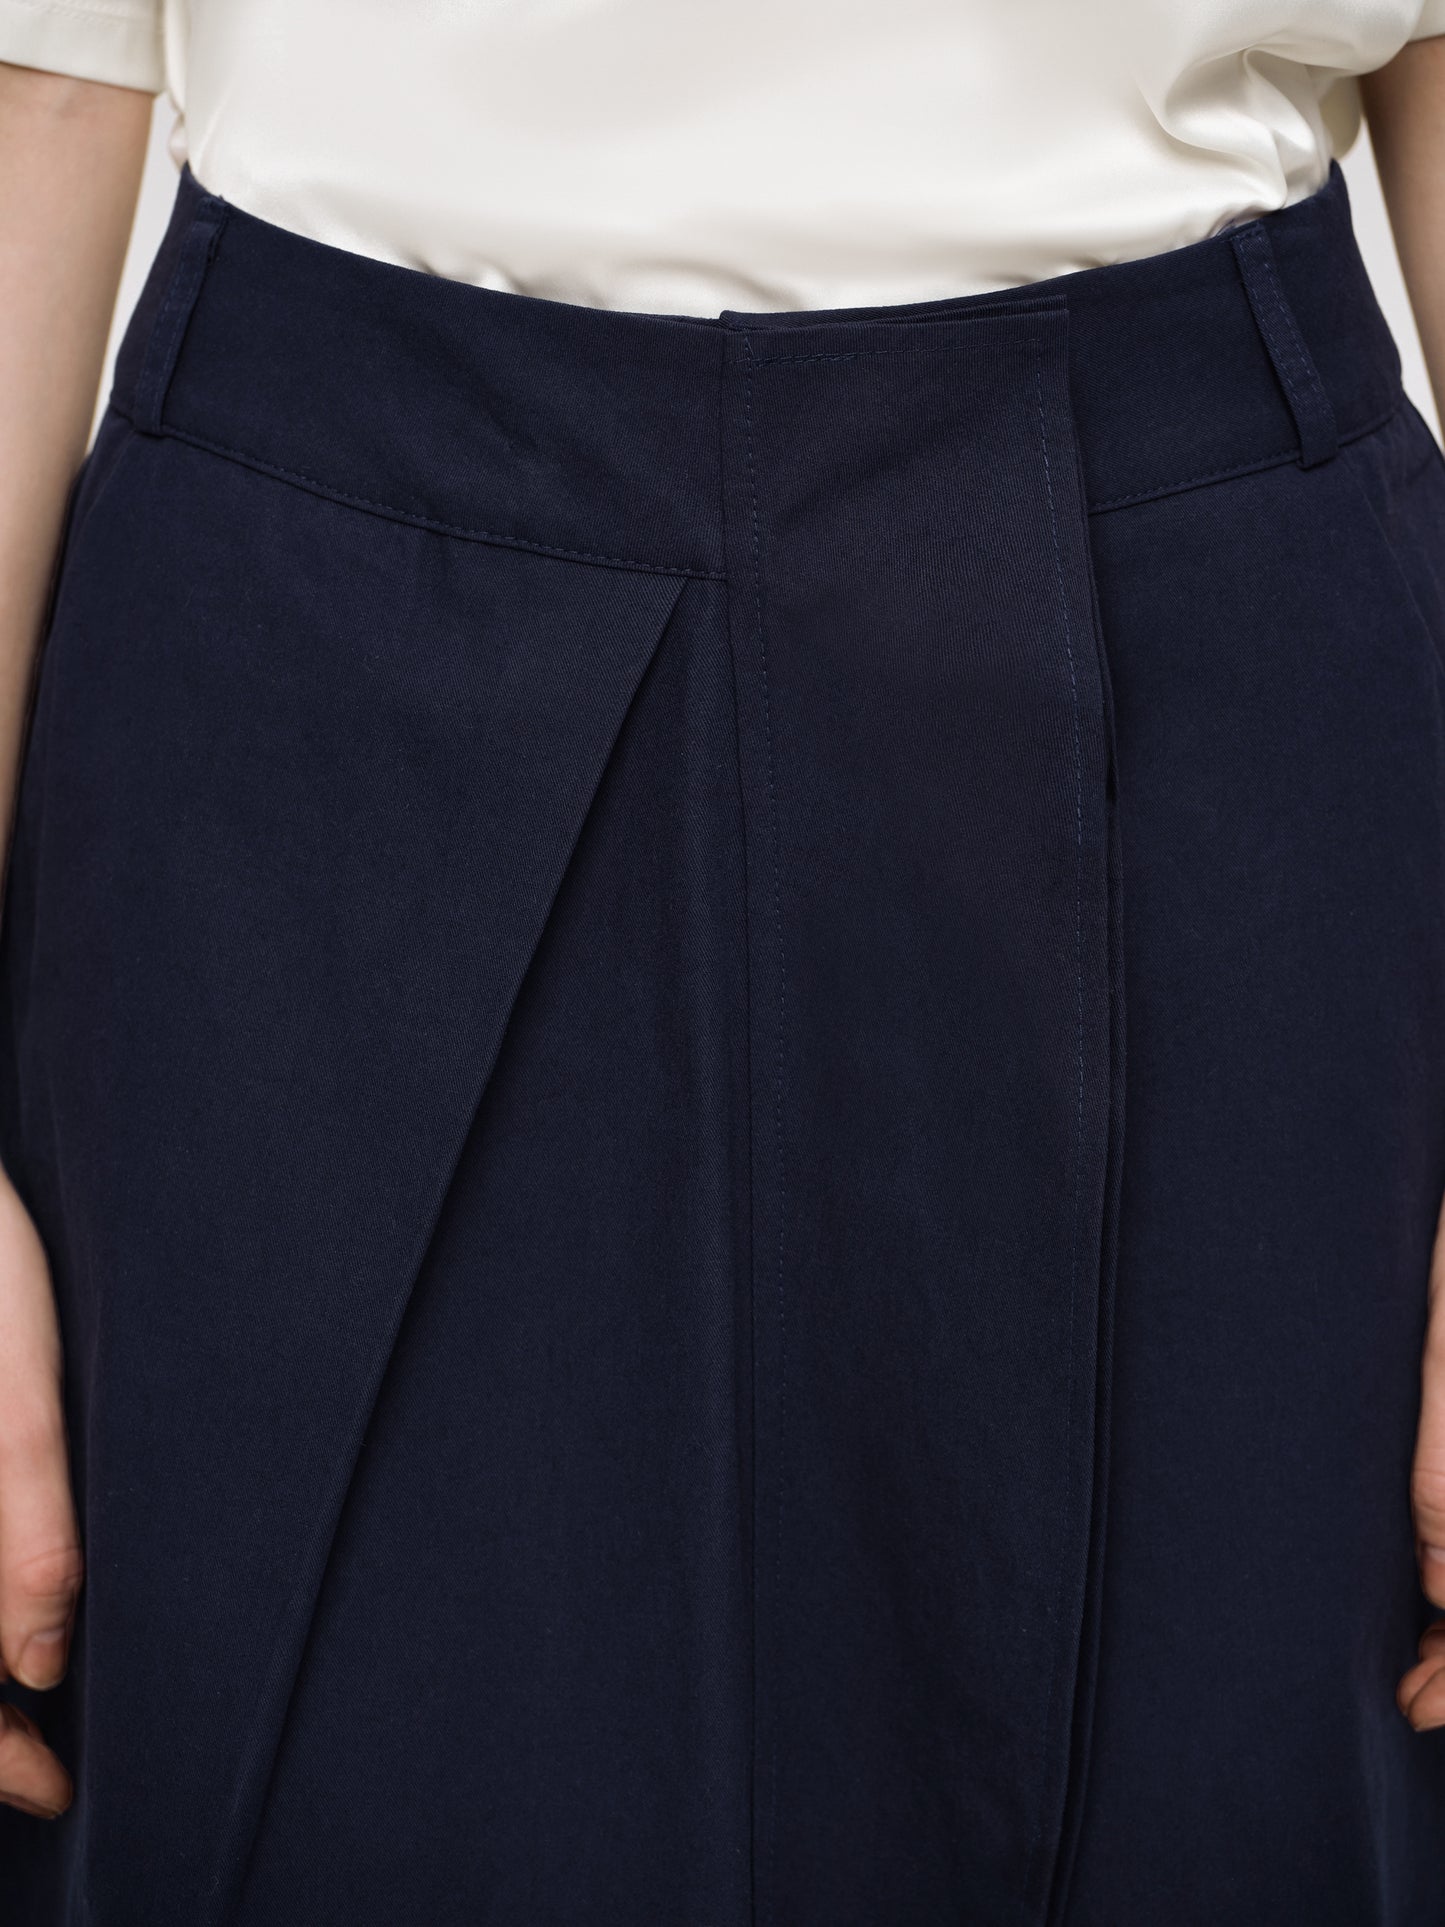 Wrapped Cotton Shorts, Navy